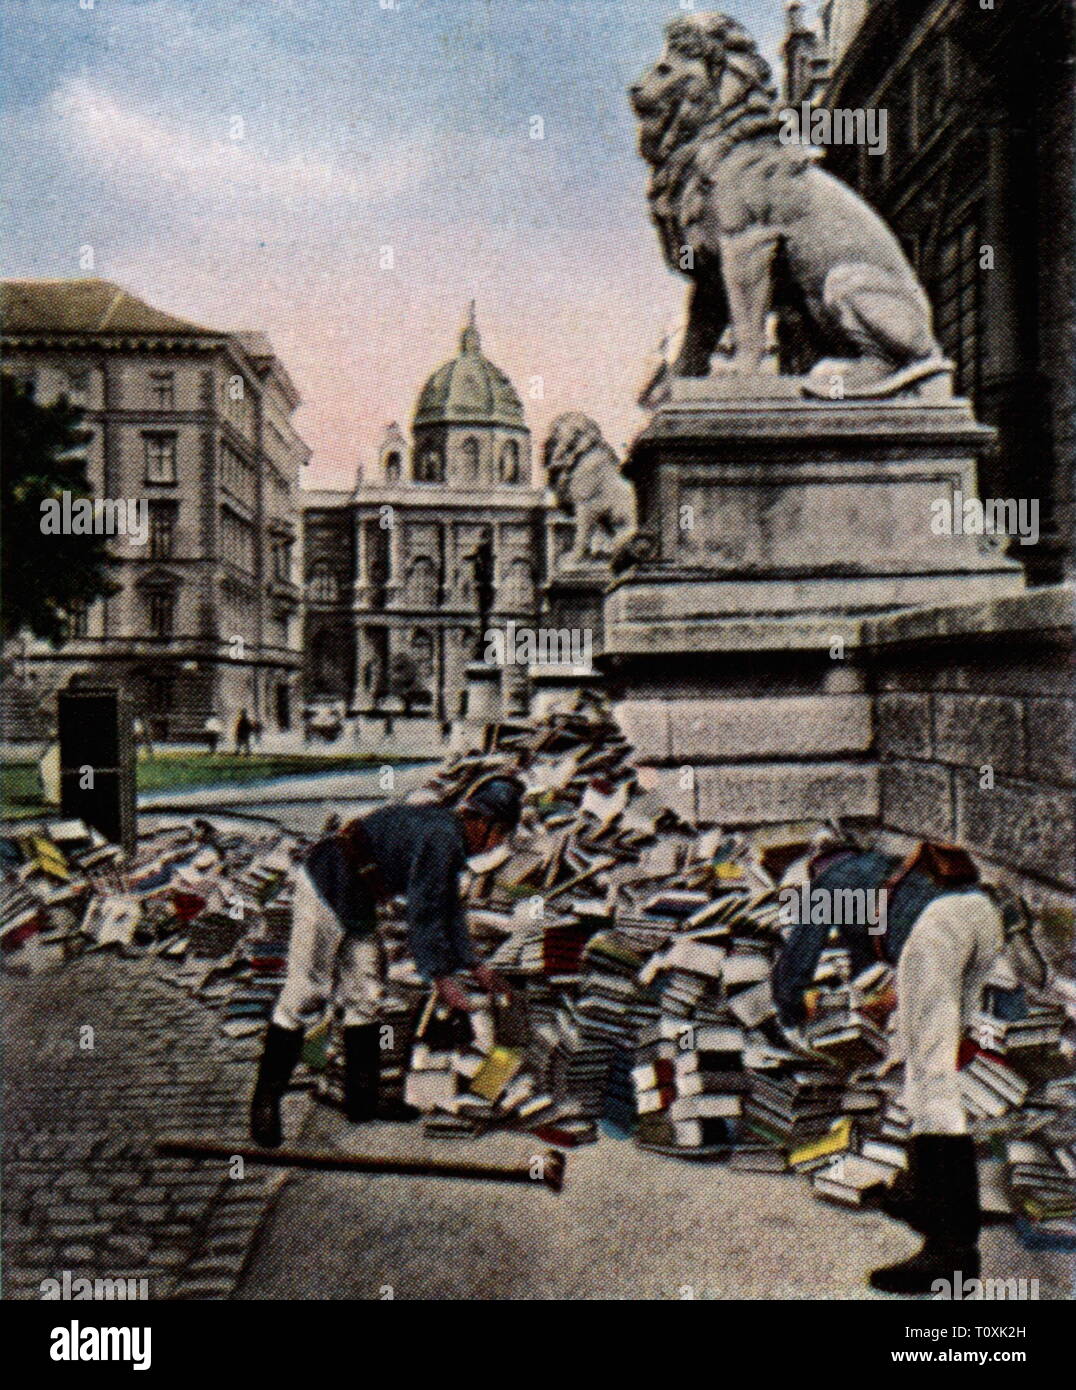 July Revolt, 15.7.1927, book and record thrown from the windows are removed by the fire brigade, 16.7.1927, coloured photograph, cigarette card, series 'Die Nachkriegszeit', 1935, fire of the Viennese law courts, Palace of Justice fire, law courts, Vienna, protest, protests, riot, riots, politics, policy, Austria, First Republic, people, 1920s, 20th century, fire, fires, book, books, record, file, records, files, fire brigade, fire department, fire brigades, fire departments, remove, removing, coloured, colored, post war period, post-war period, , Additional-Rights-Clearance-Info-Not-Available Stock Photo